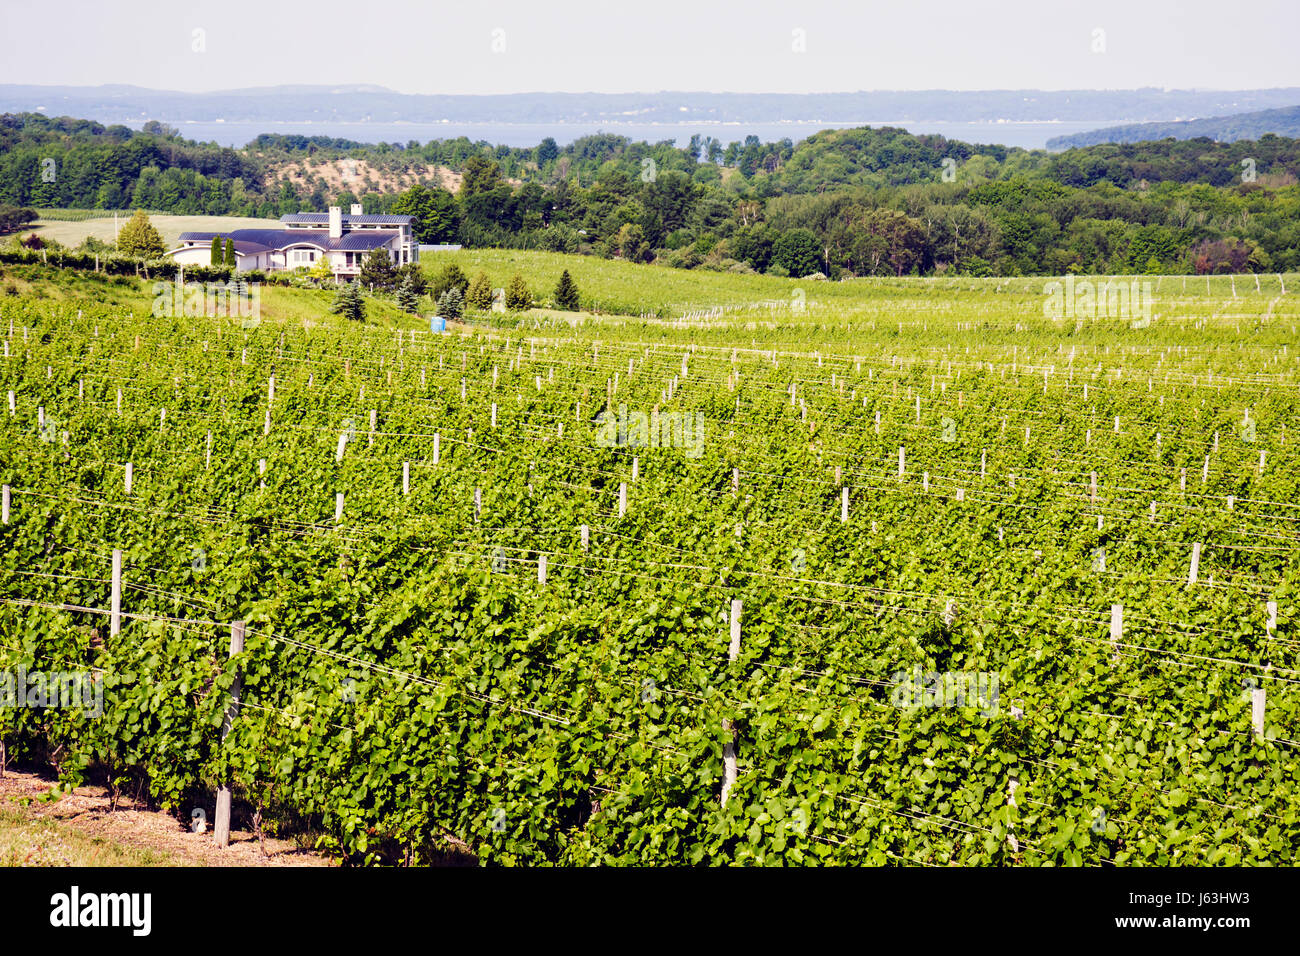 Traverse City Michigan,Old Mission Peninsula,Chateau Grand Traverse,vineyard,vineyards,West Arm Grand Traverse Bay water,viticulture,agriculture,plant Stock Photo